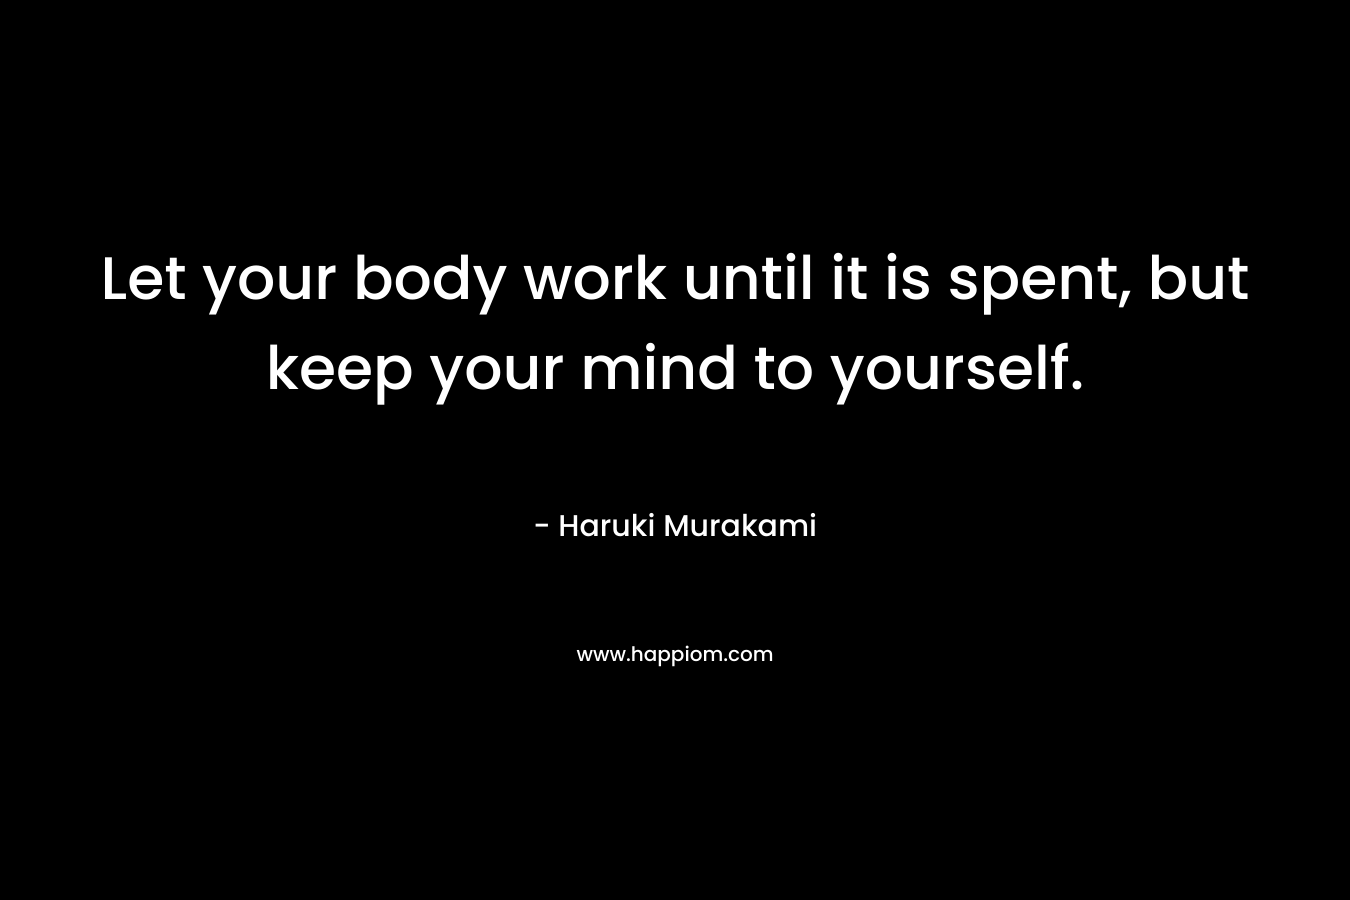 Let your body work until it is spent, but keep your mind to yourself.